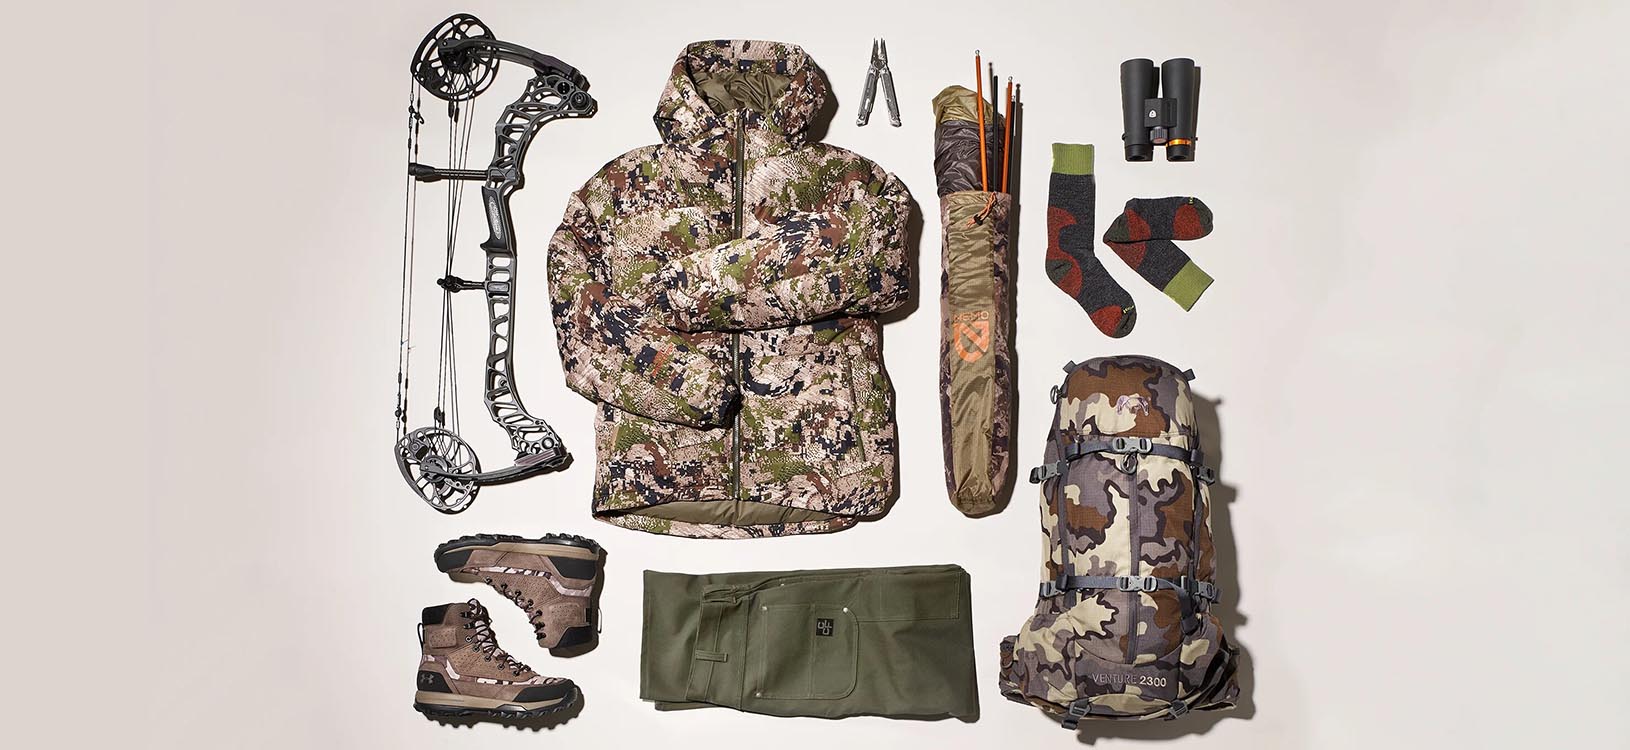 Hunting equipment for winter hunting